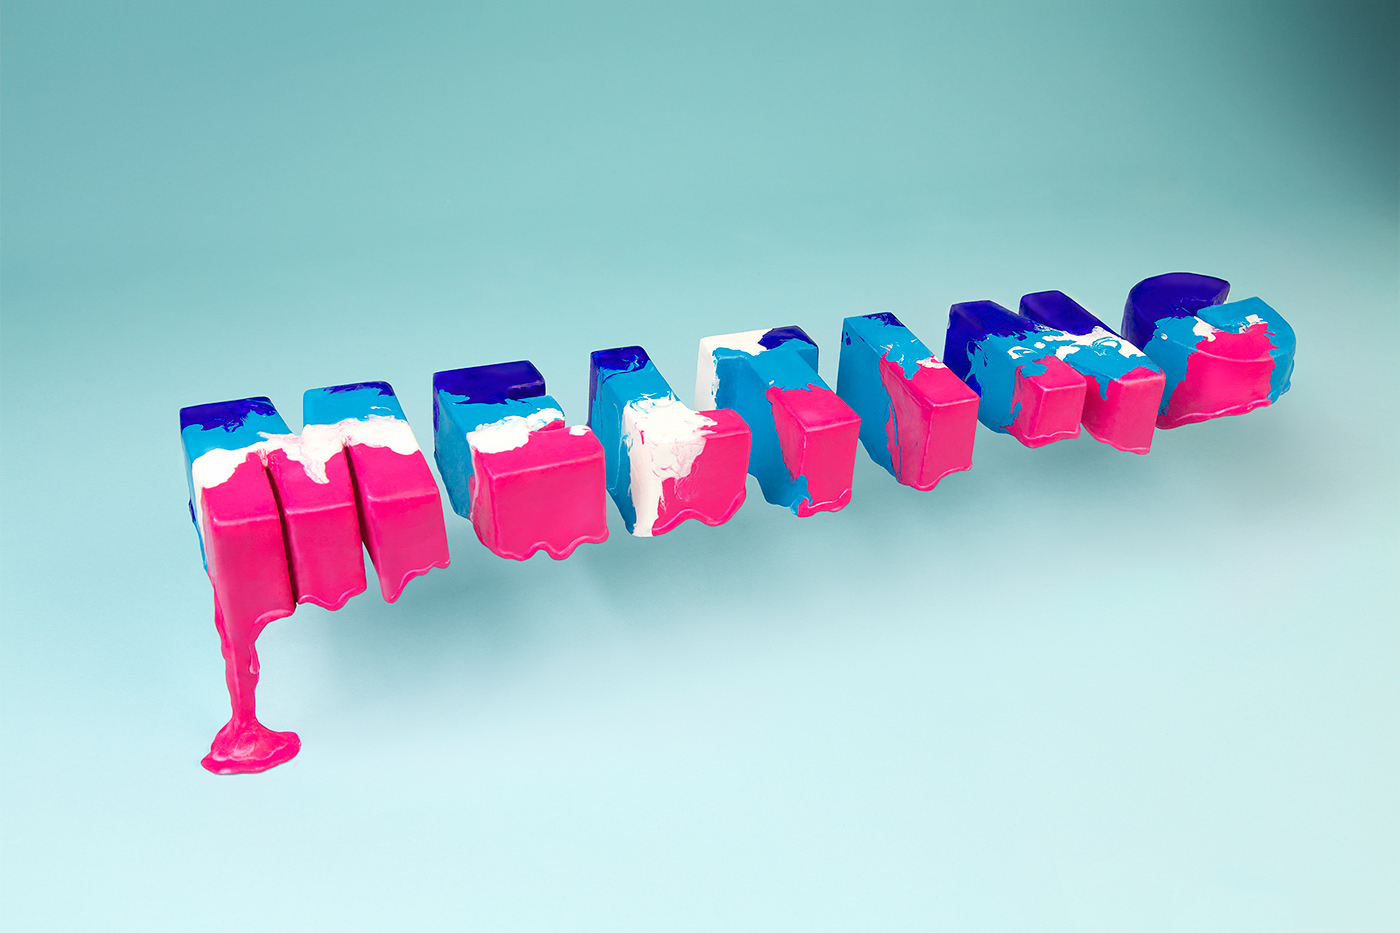 OFFF melting colors layers inside letters invisible vasava 15th anniversary book artwork stillife setdesign